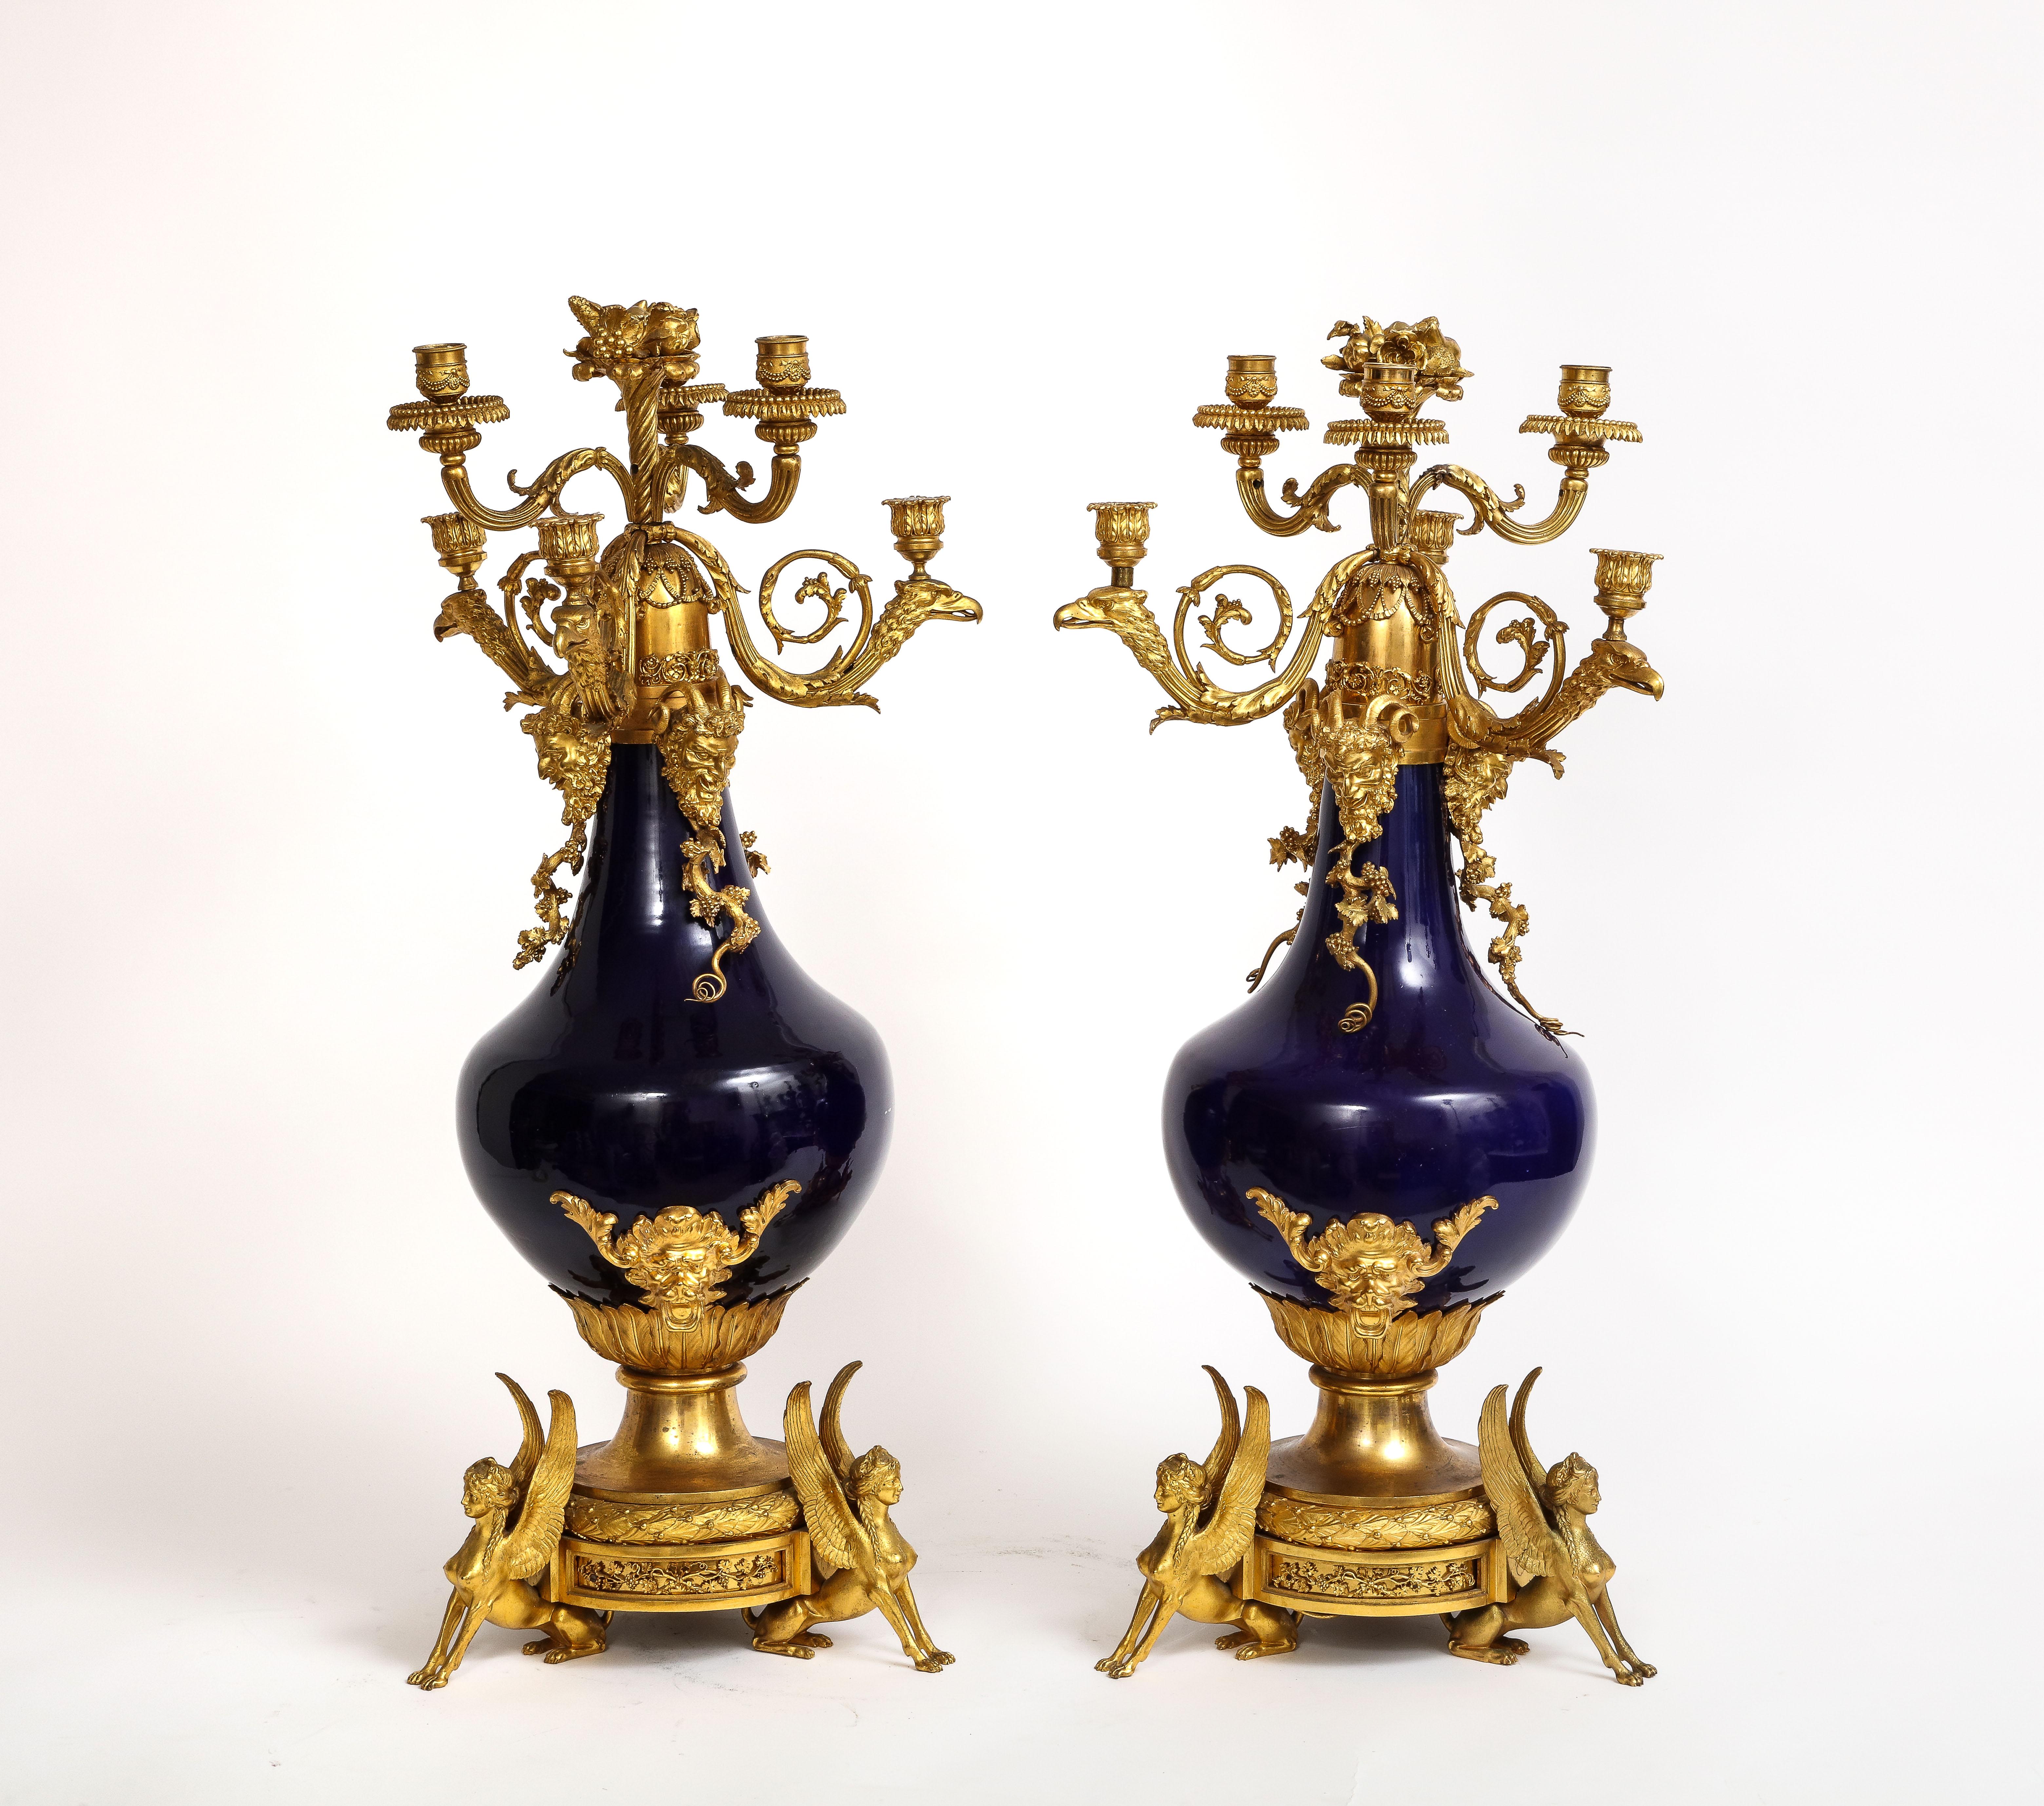 A Very Rare and Highly Unique Pair of French Ormolu Mounted Blue Porcelain Candelabras, Att. Henry Dasson.  Presenting a truly exquisite pair of French Porcelain Ormolu Mounted Candelabras.  Henry Dasson is renowned for his exceptional bronze